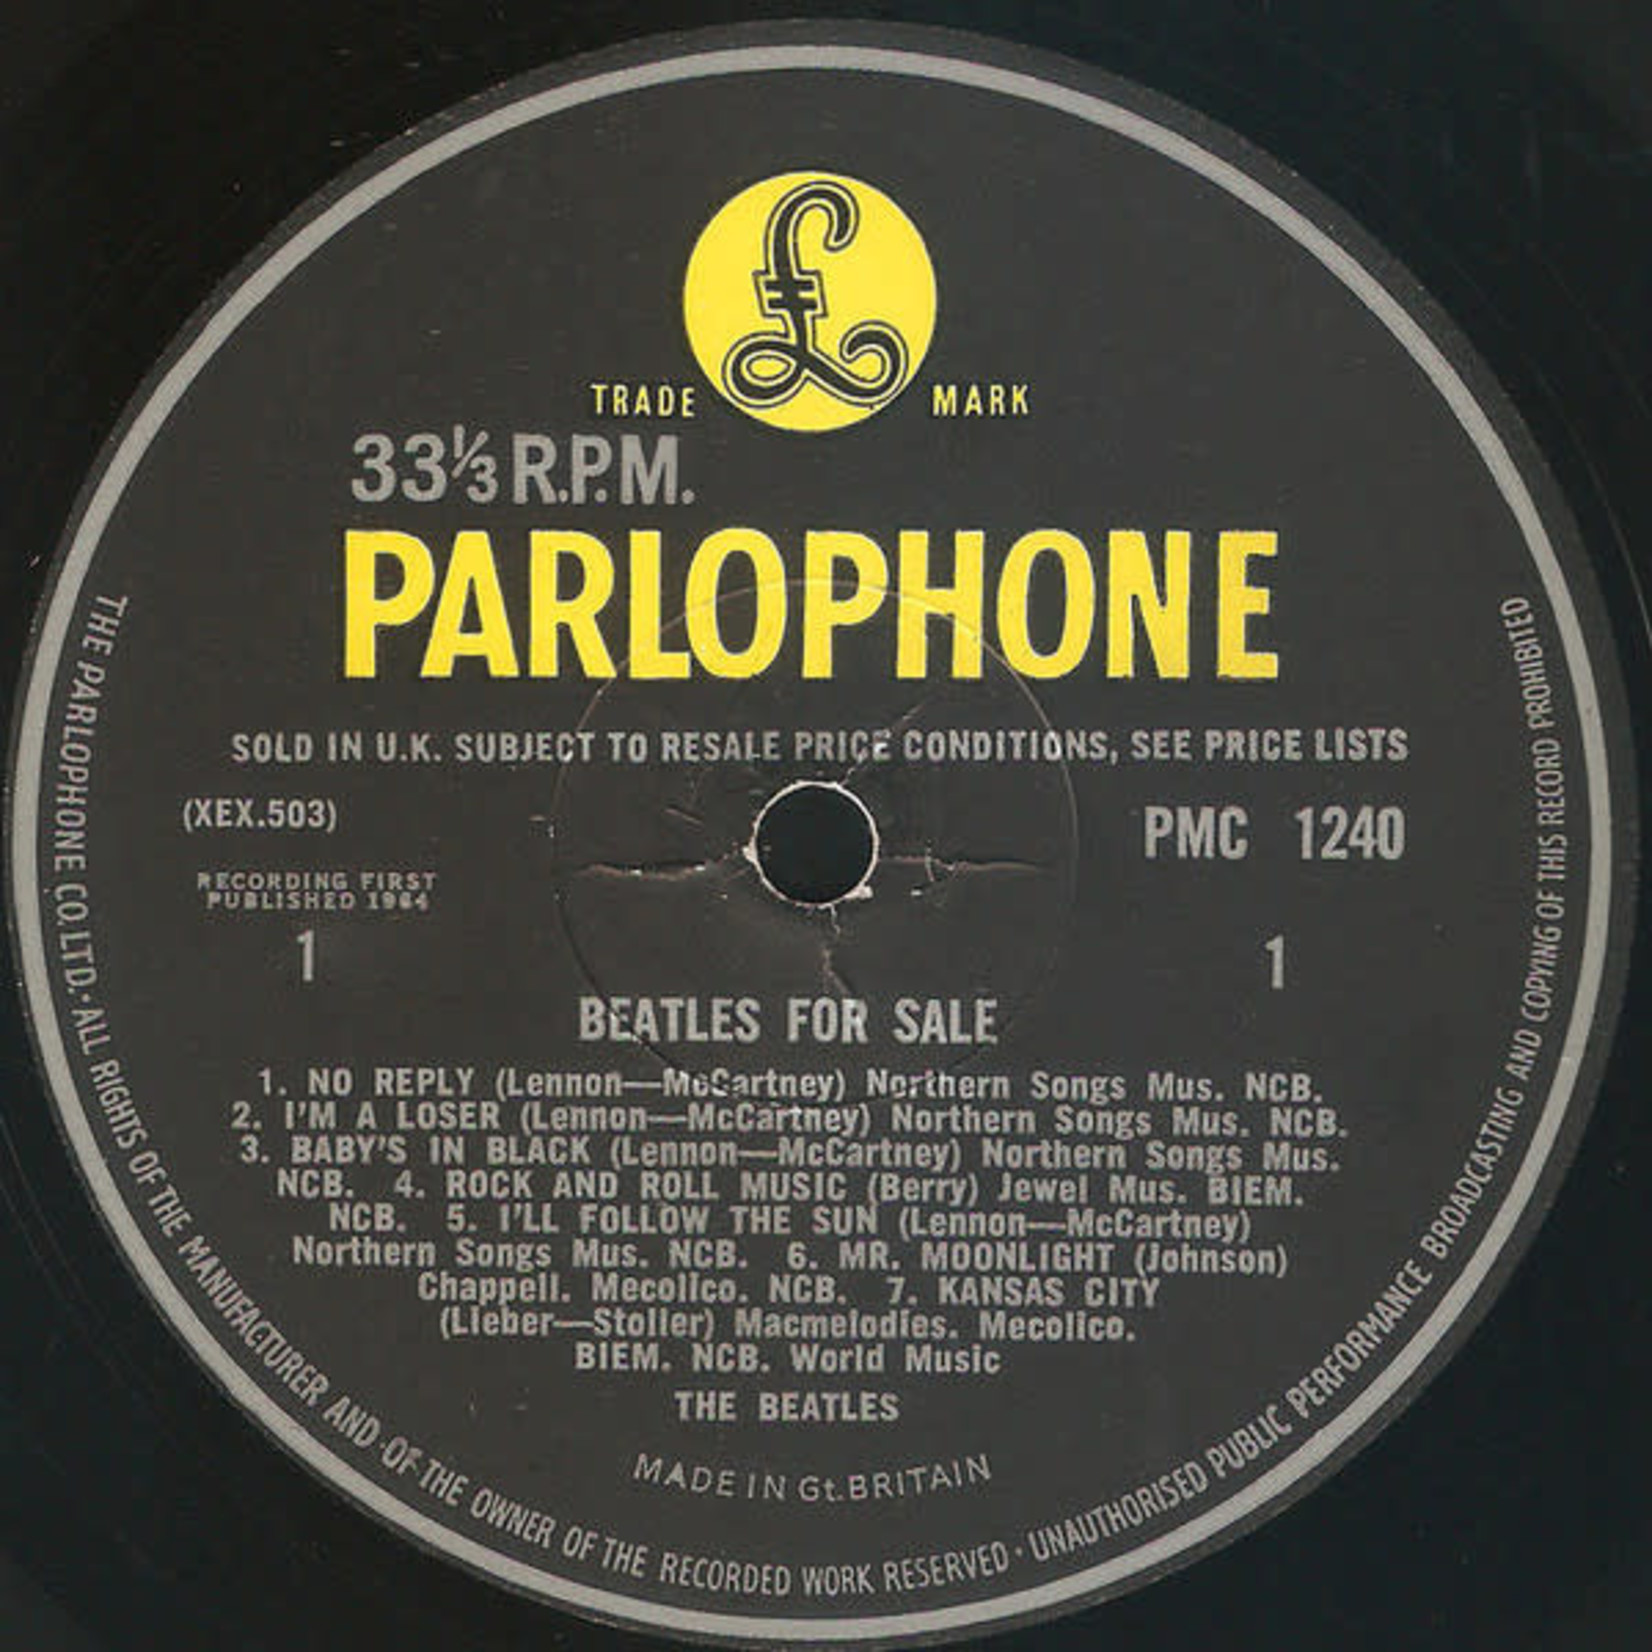 [Kollectibles] Beatles - Beatles for Sale (Mono, UK, yellow Parlophone, KT Tax Stamp, Company Inner, Disc VG)